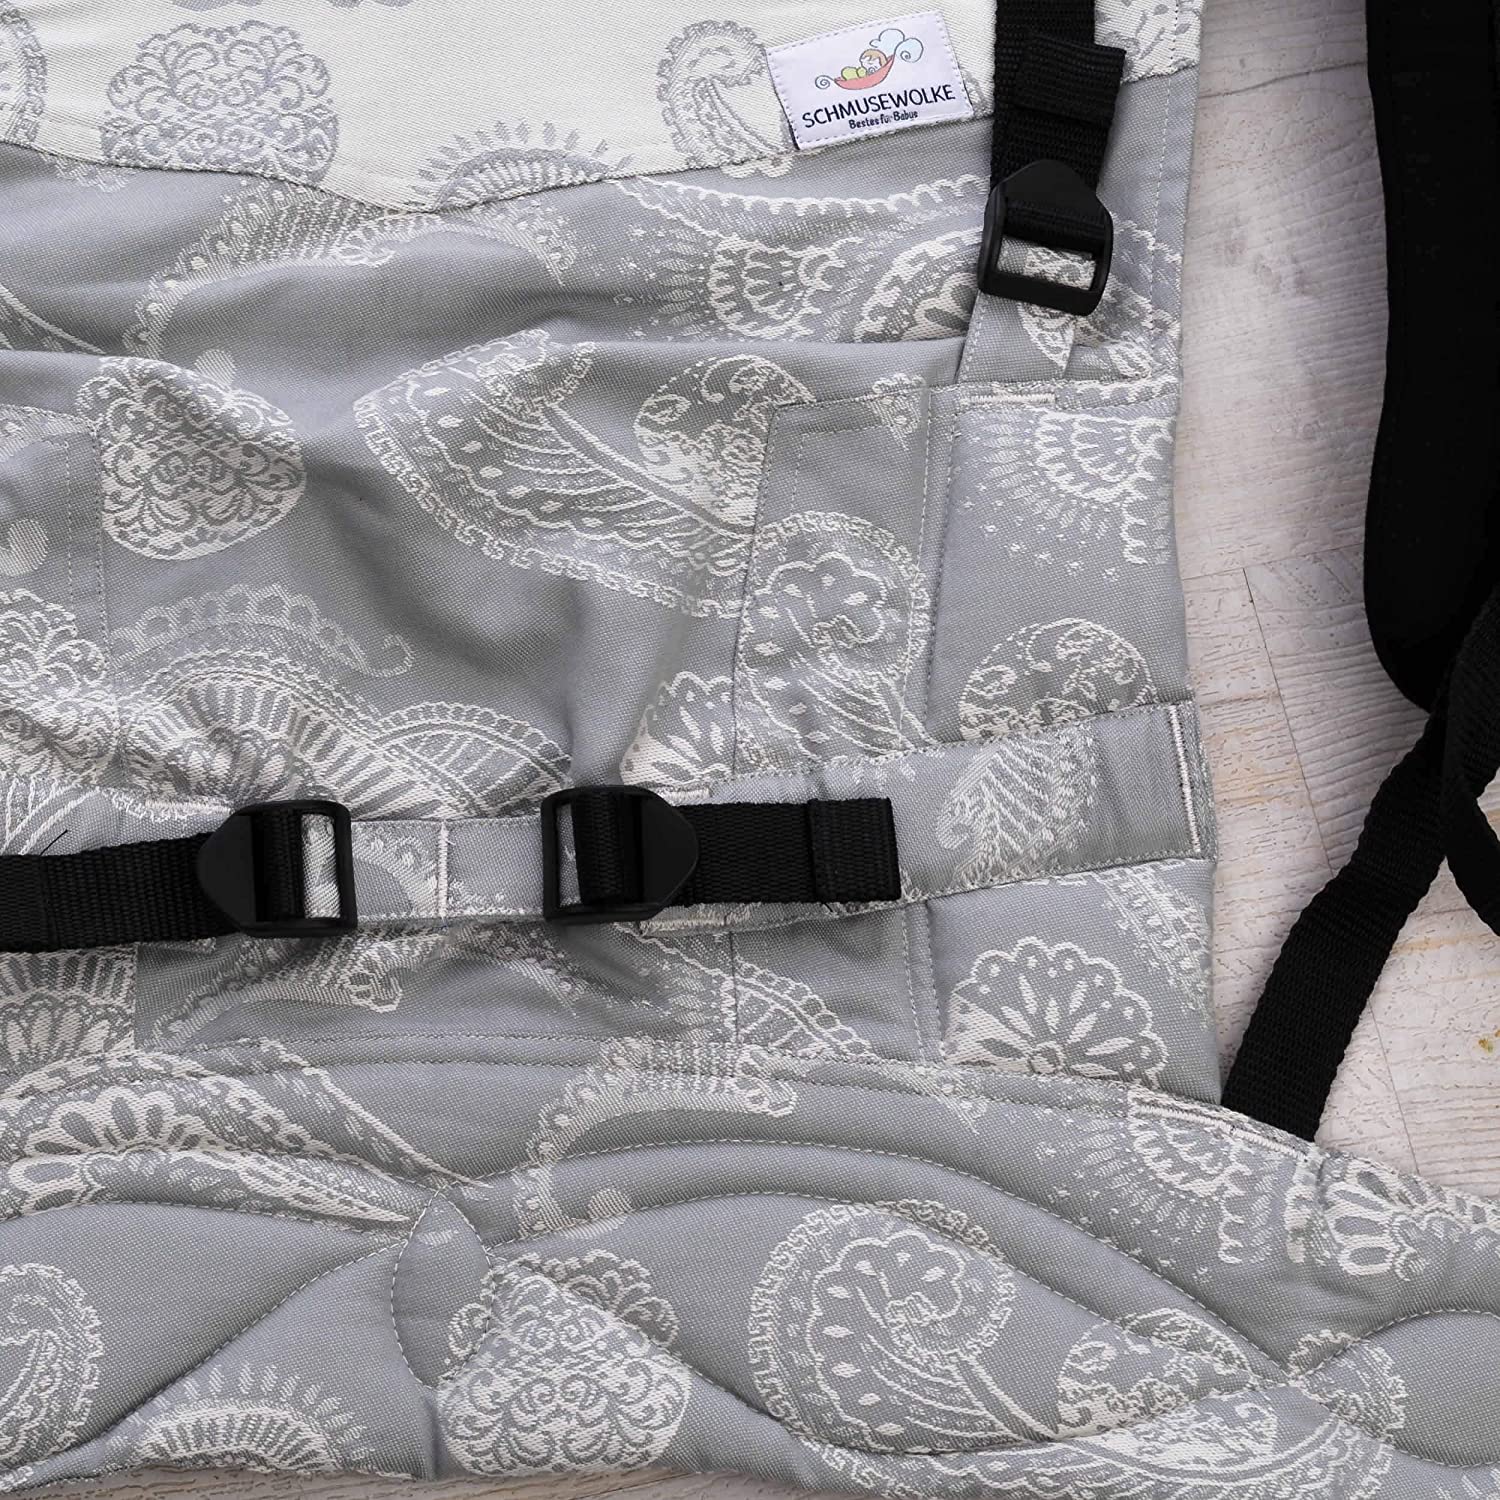 Schmusewolke Baby Carrier for Newborns and Toddlers / for Carrying at Front or Back / Organic Cotton / Full Buckle